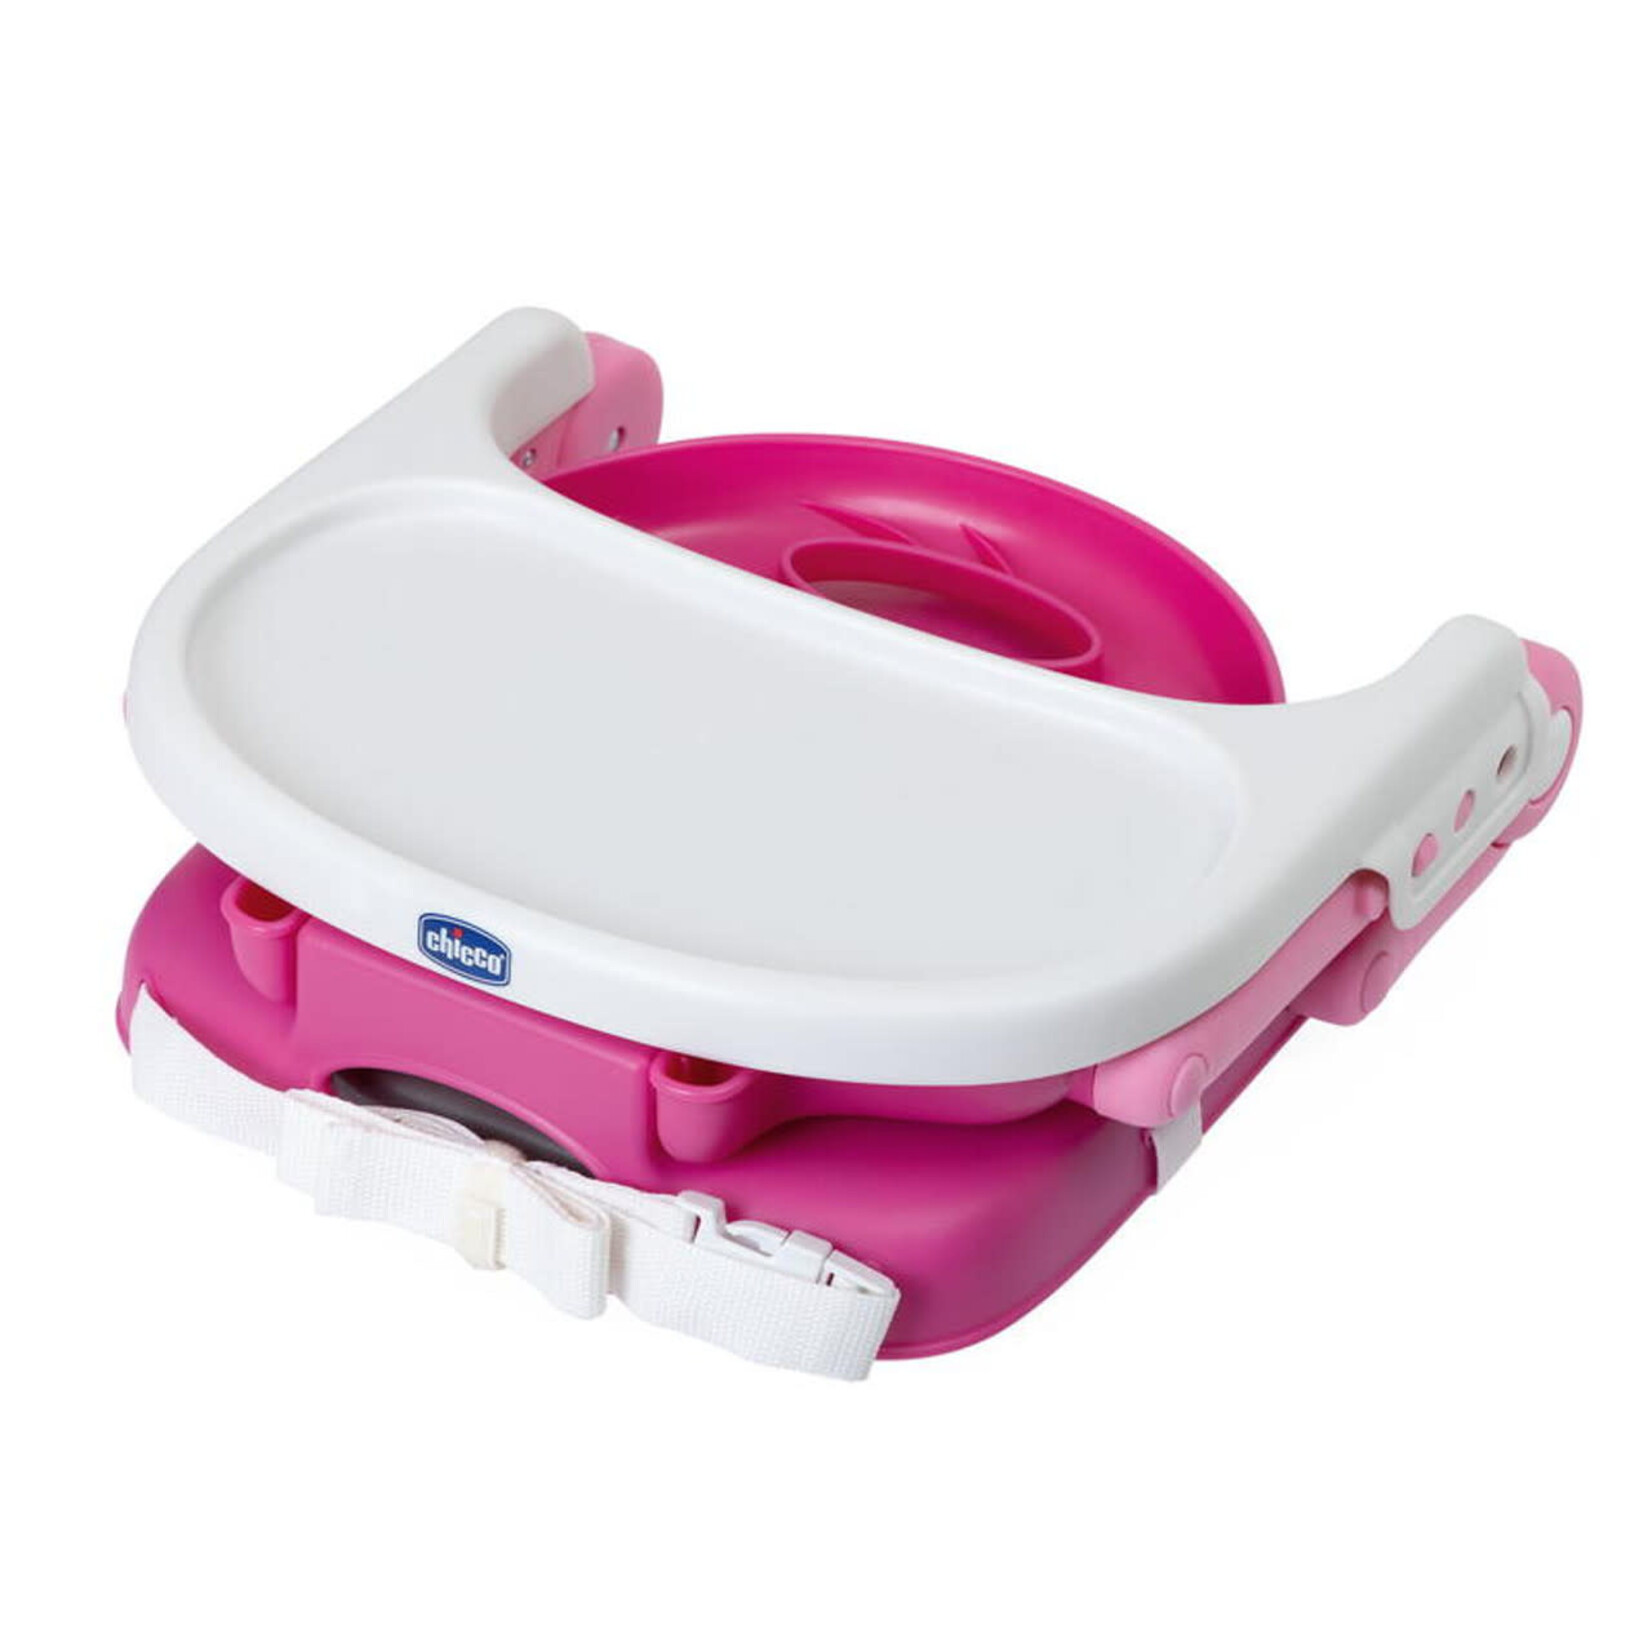 Chicco JUVENILE Booster Seat: Pocket Snack - Pink